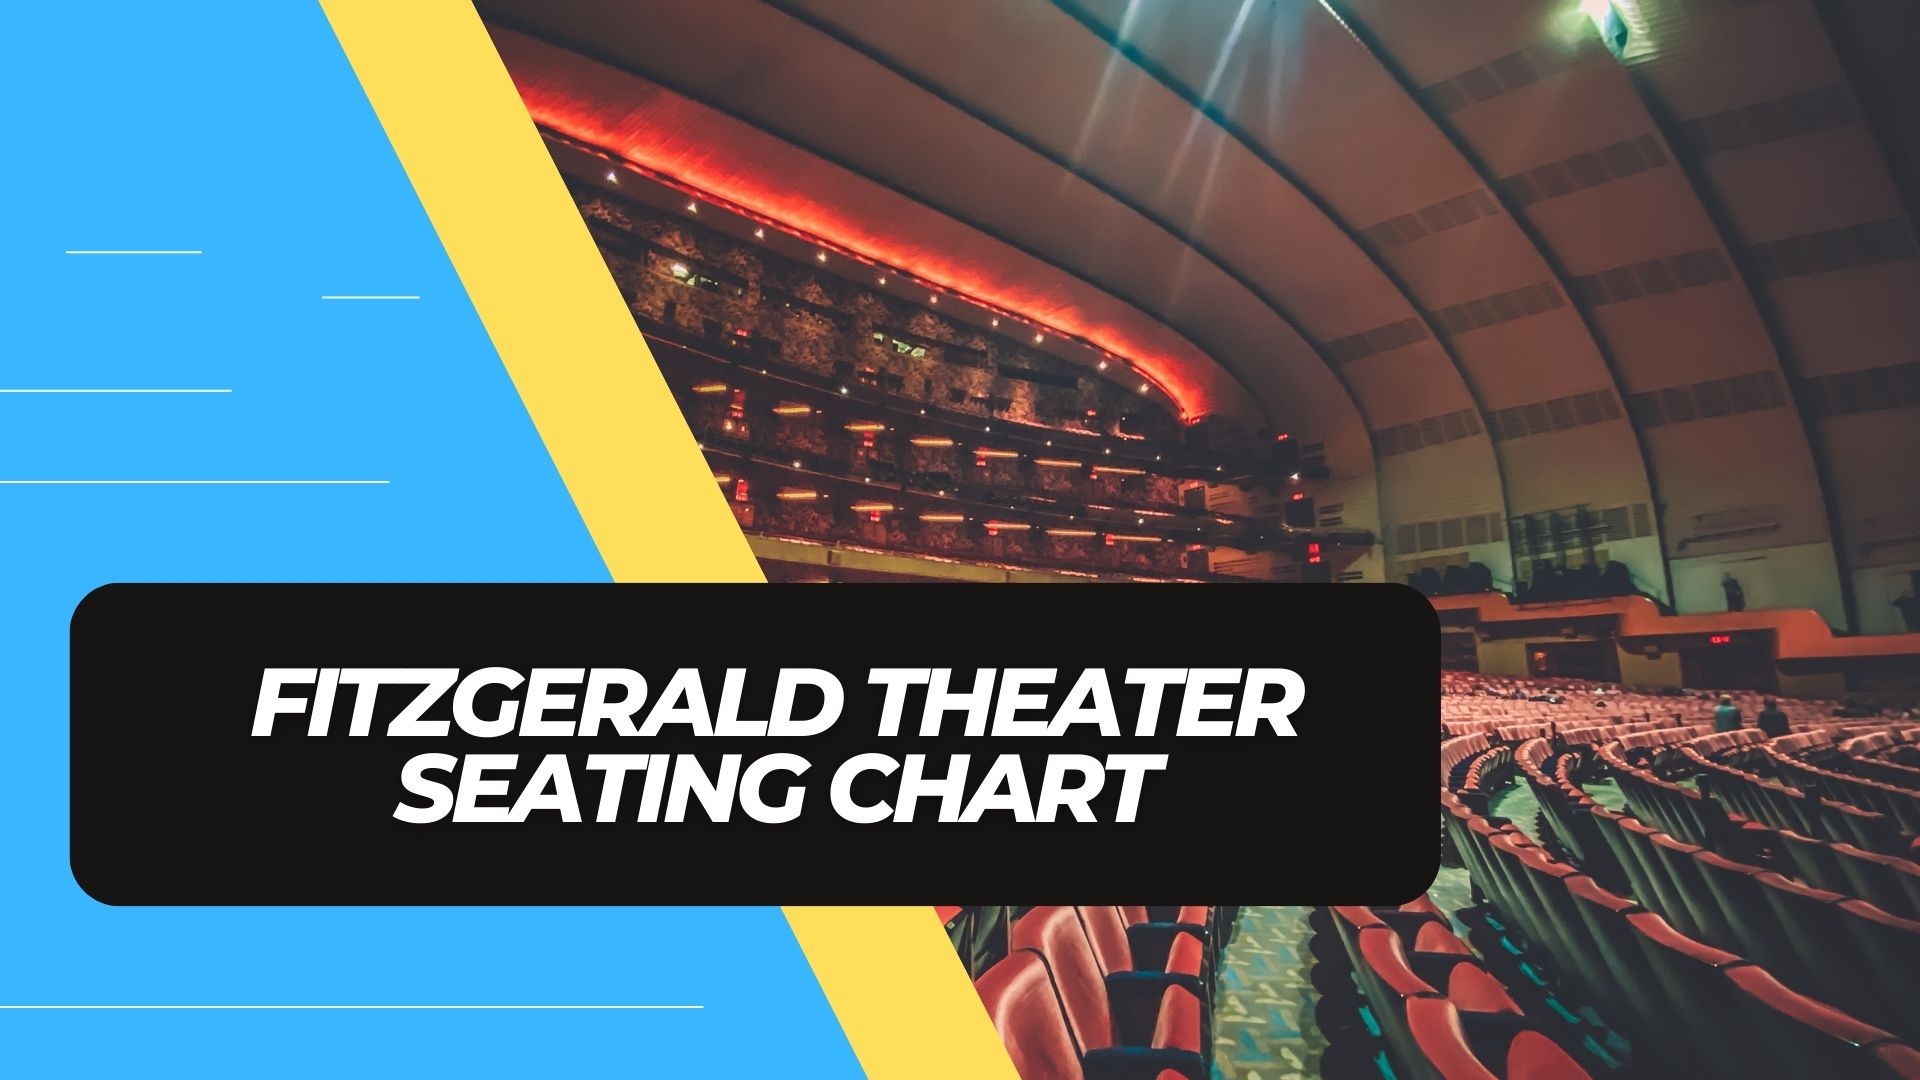 Fitzgerald Theater Seating Chart A Guide To The Best Seats In The House